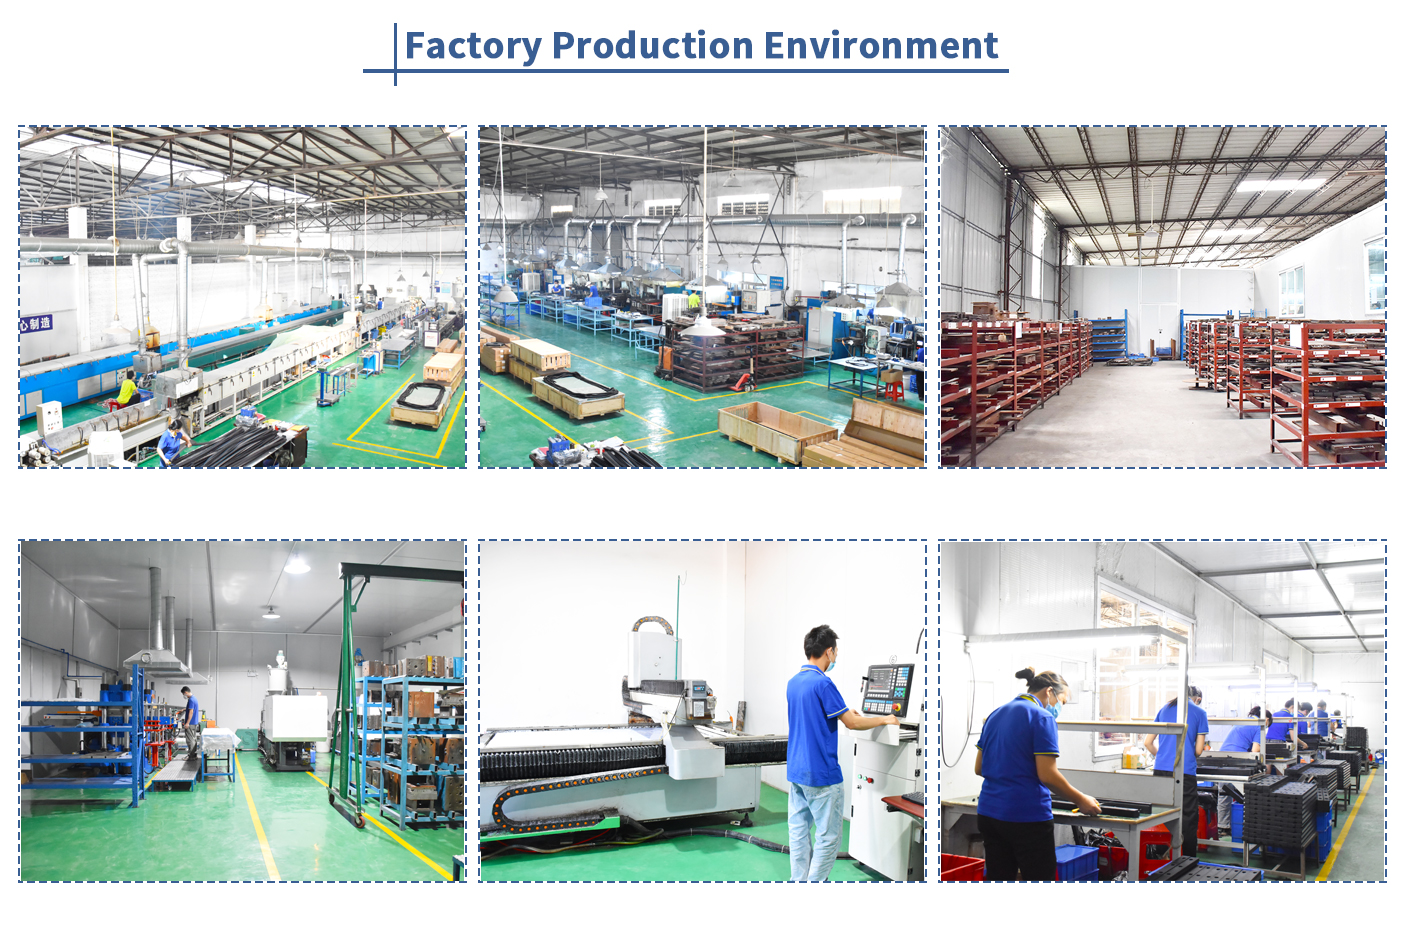 Factory production environment